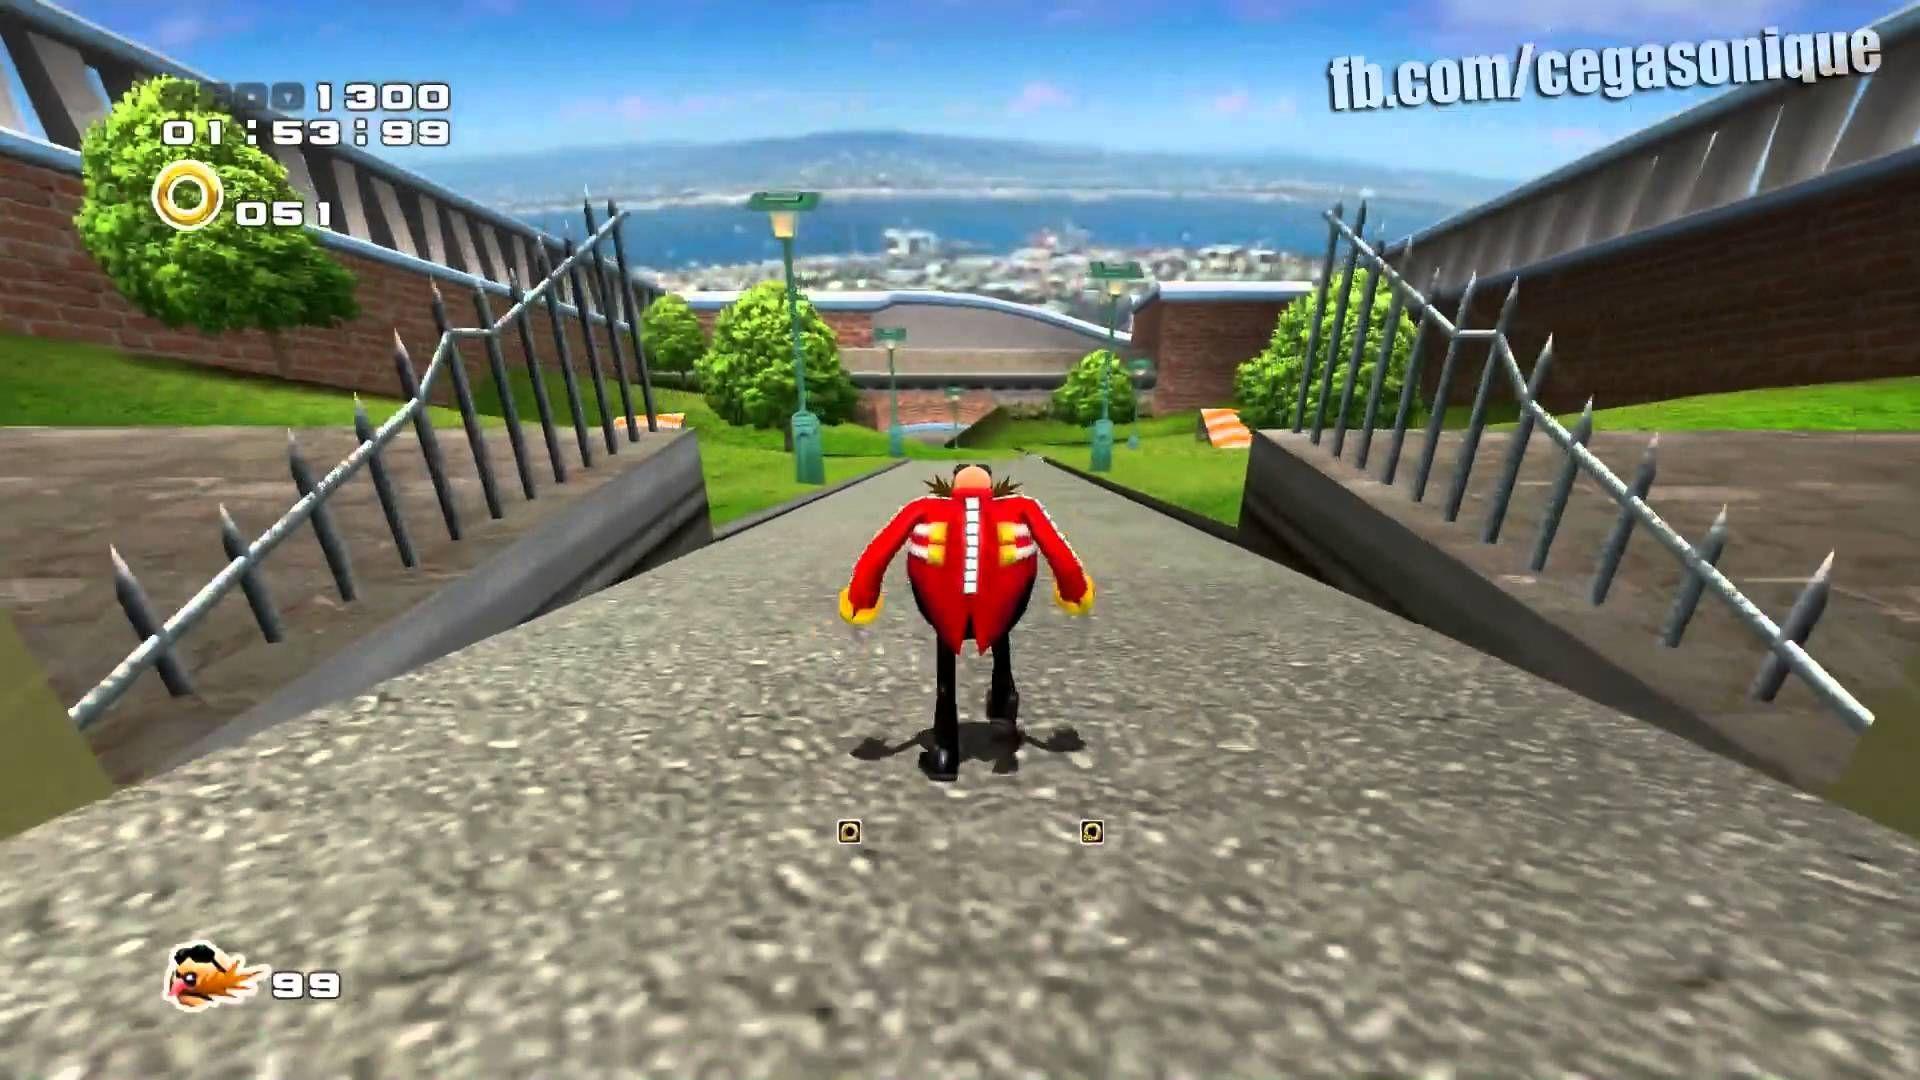 Playing as Dr Eggman in Sonic Adventure 2's City Escape did I